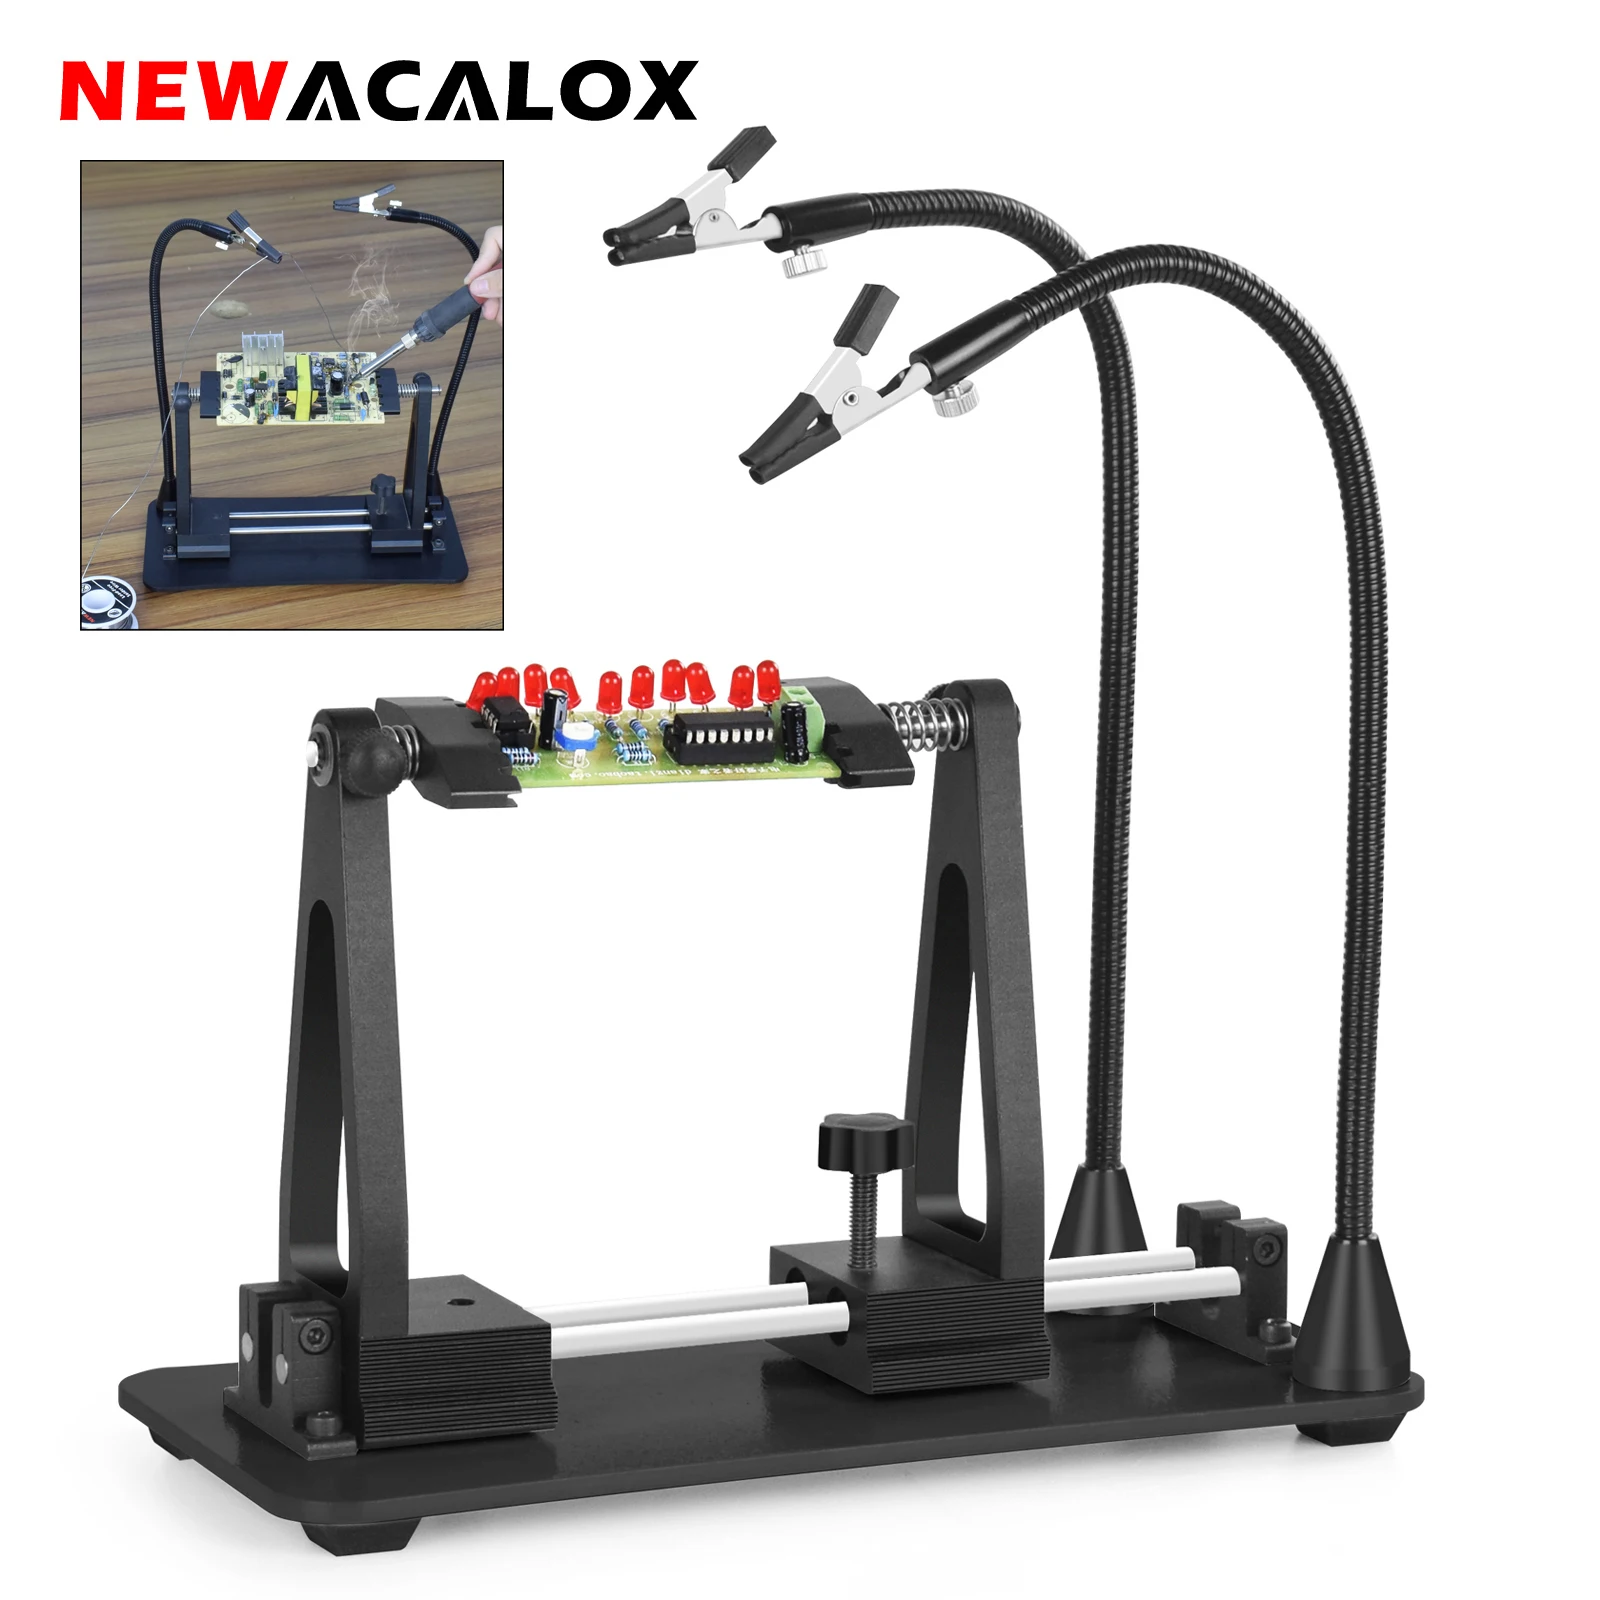 NEWACALOX 360° Adjustable PCB Holder with 2Pcs Magnetic Flexible Soldering Third Hand Welding Repair Helping Hands Station newacalox soldering helping hands third hand tools with large vise base soldering iron tips cleaner ball 3x led magnifying lamp